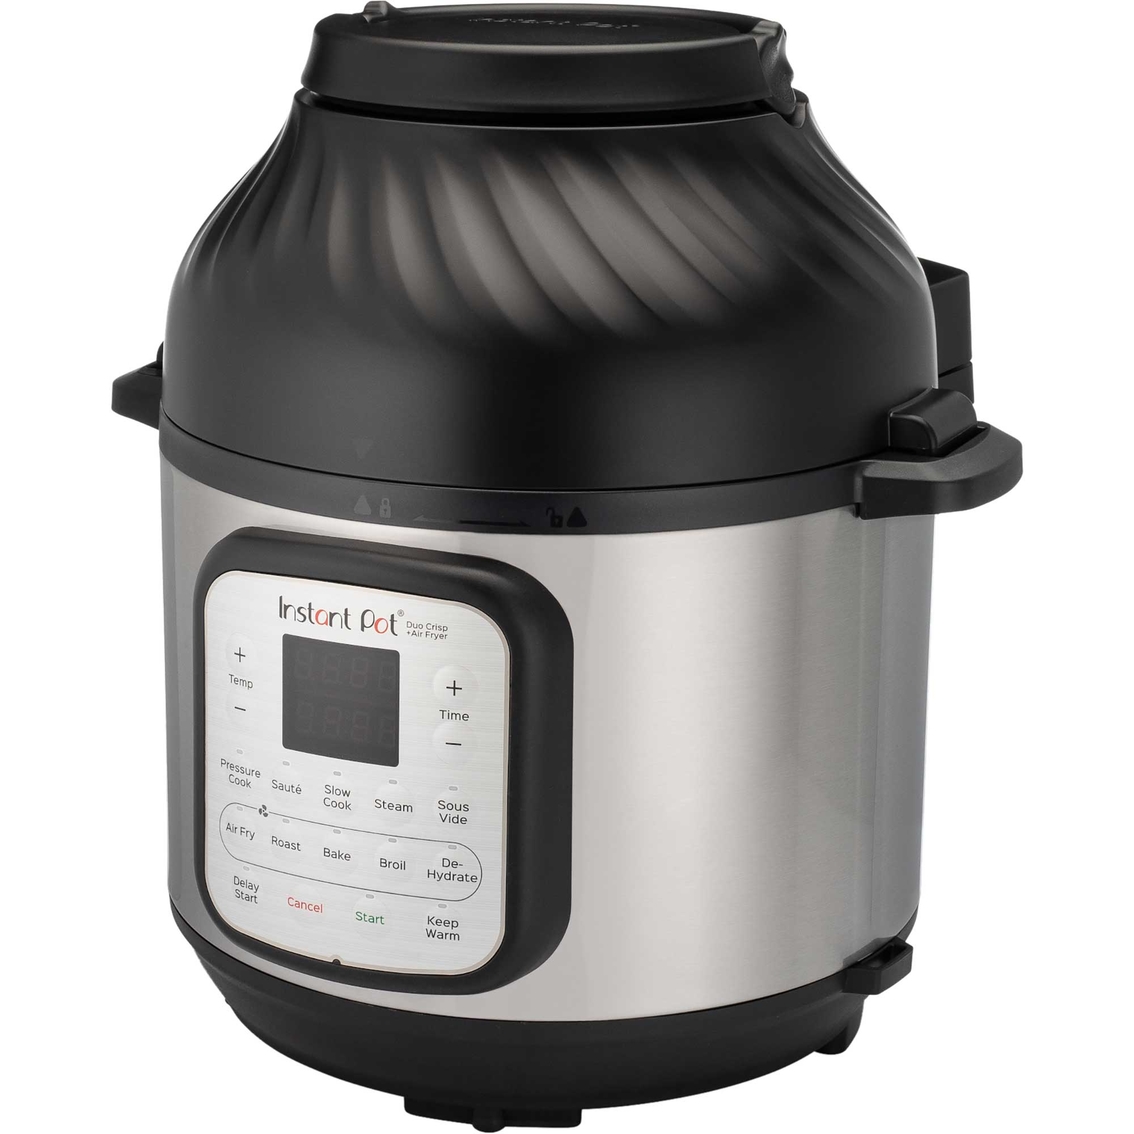 Instant Pot Duo Crisp Multi Use Programmable Pressure Cooker and Air Fryer Combo - Image 2 of 6